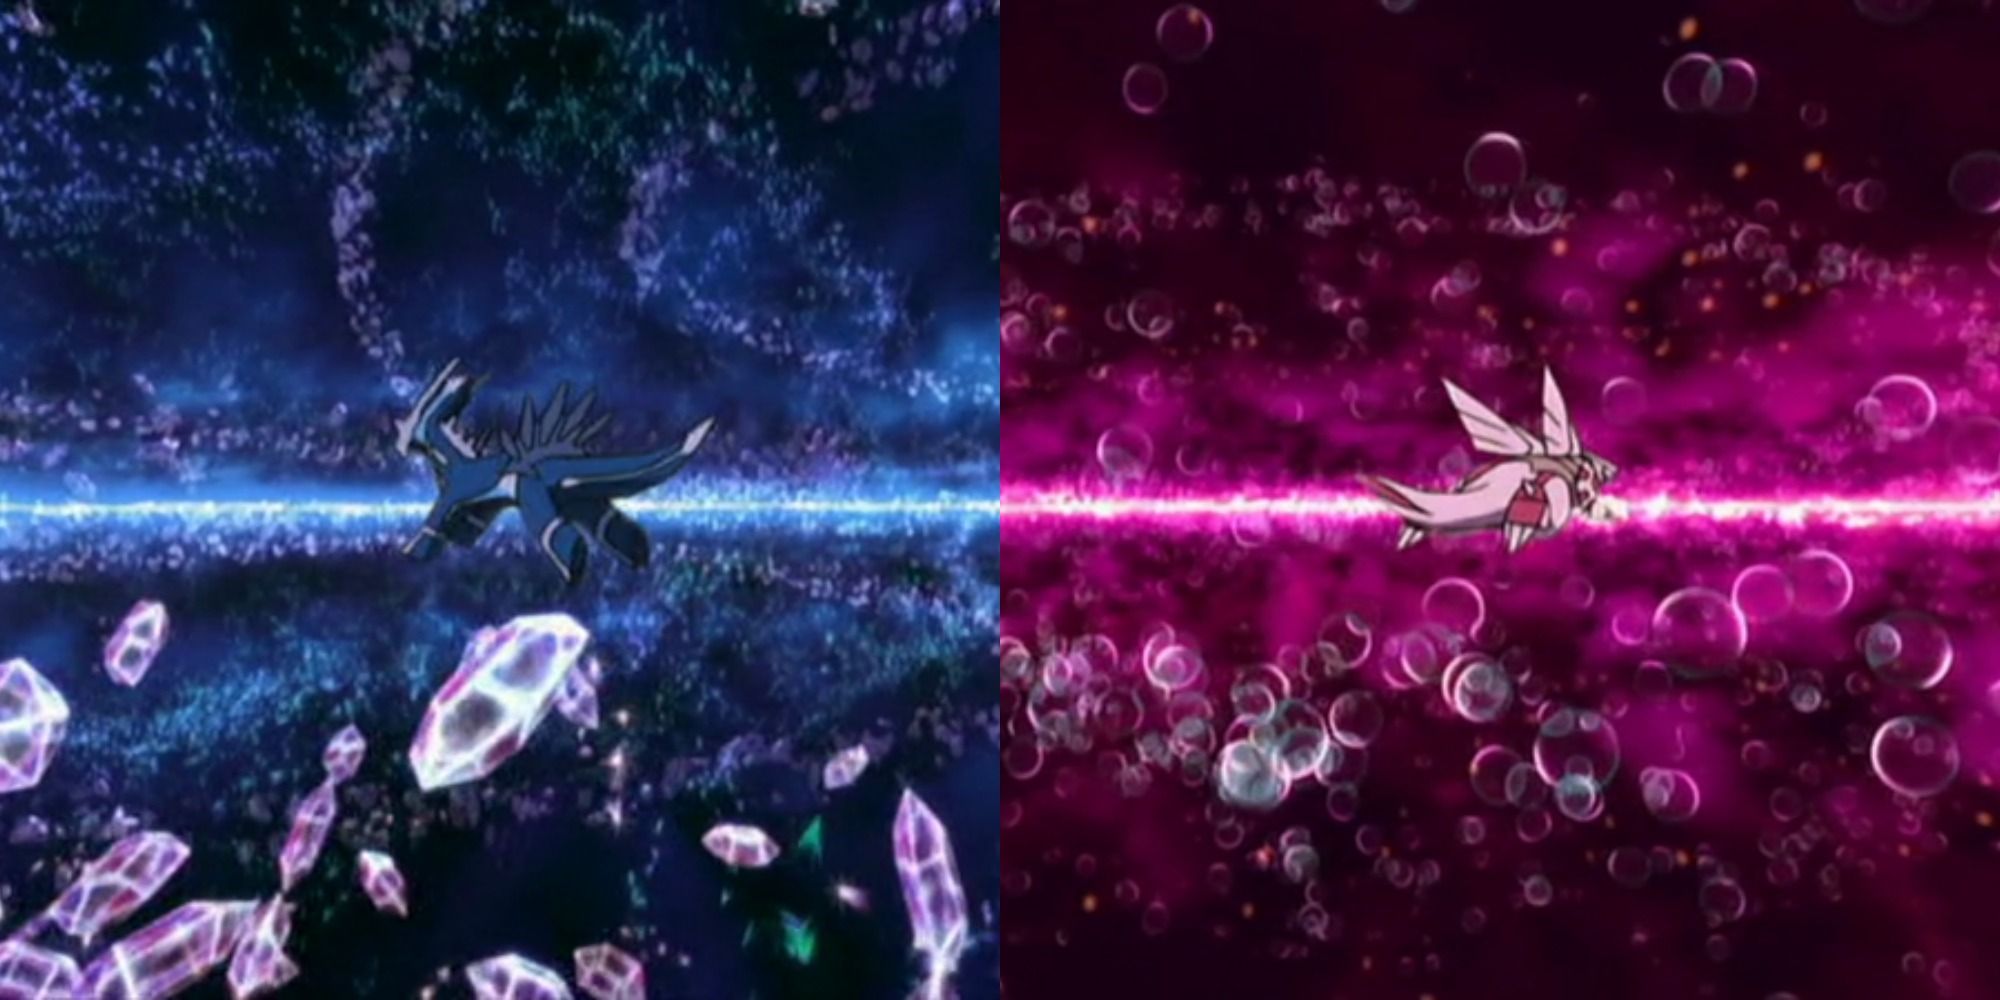 A split image with Dialga in the Temporal World to the left and Palkia in the Spatial World to the right